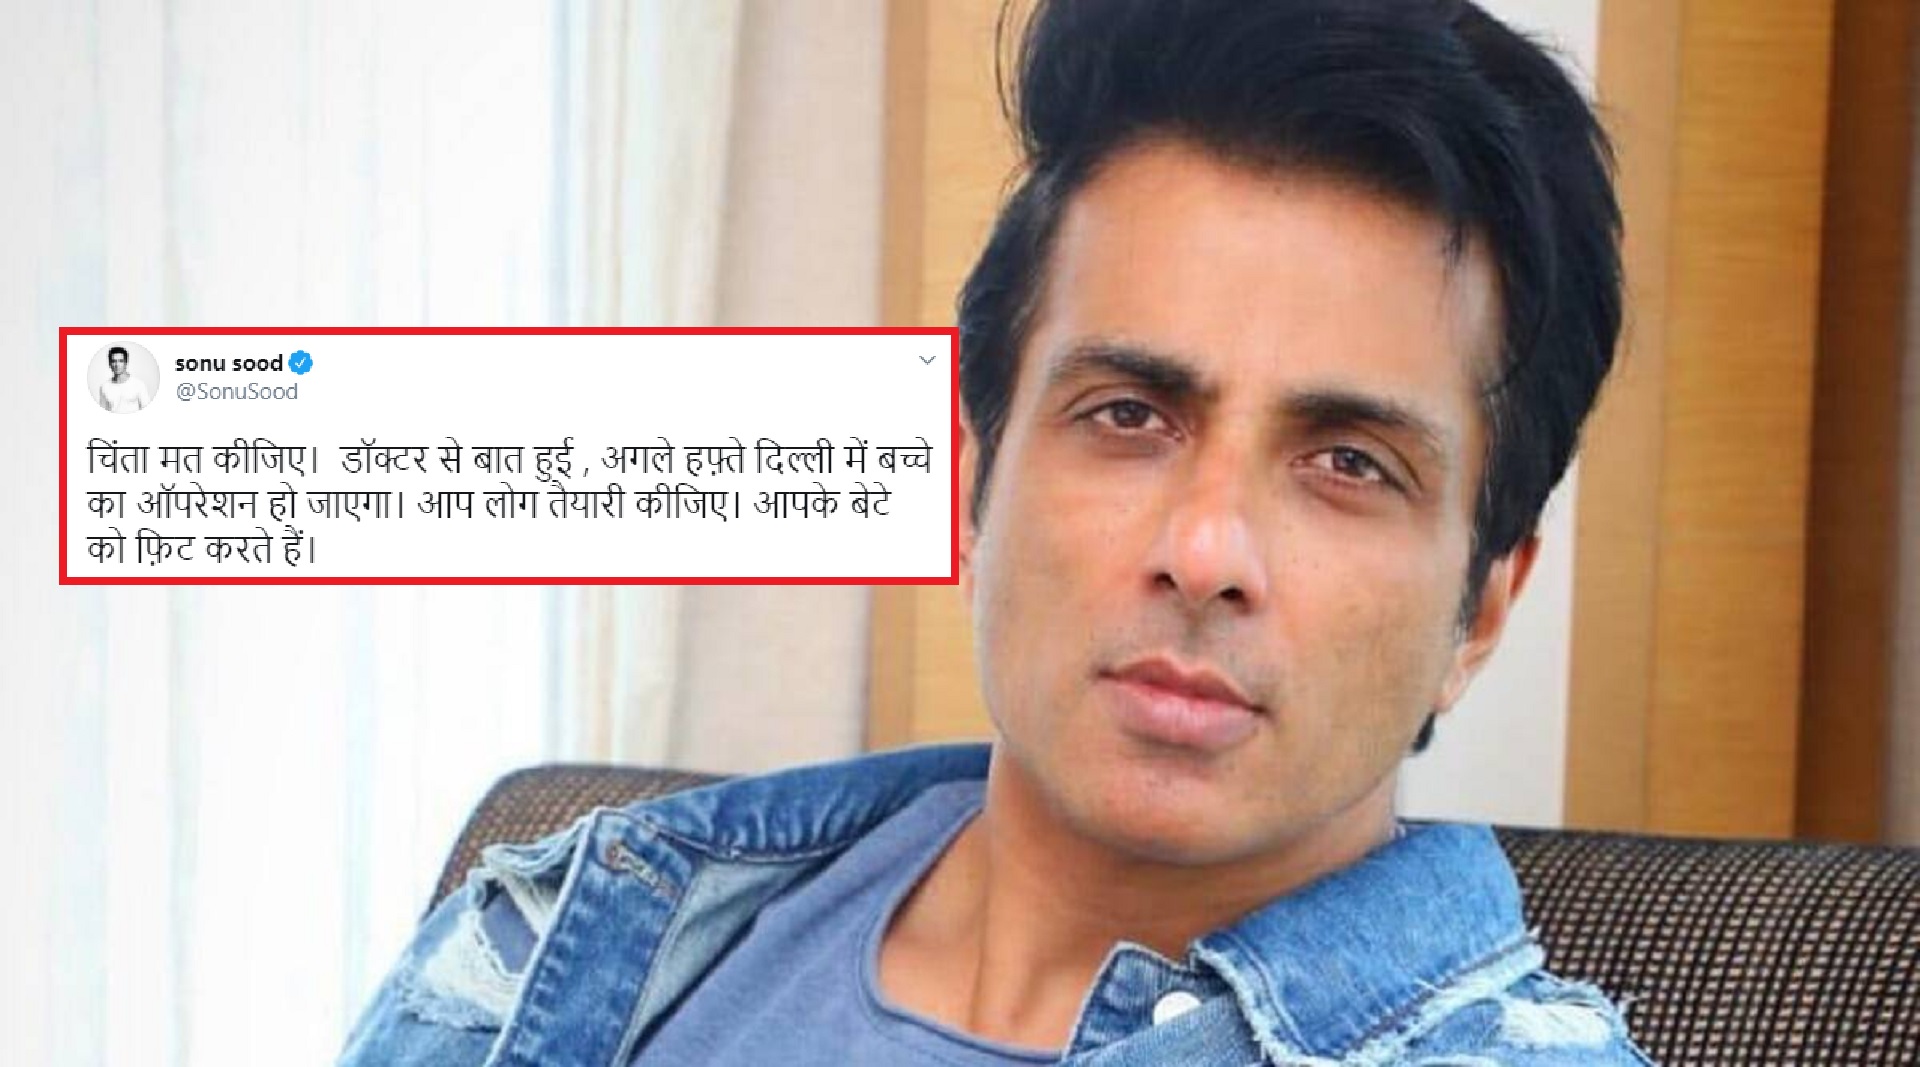 Sonu Sood Comes To The Rescue Of 11 Year Old Suffering From Brain Tumour